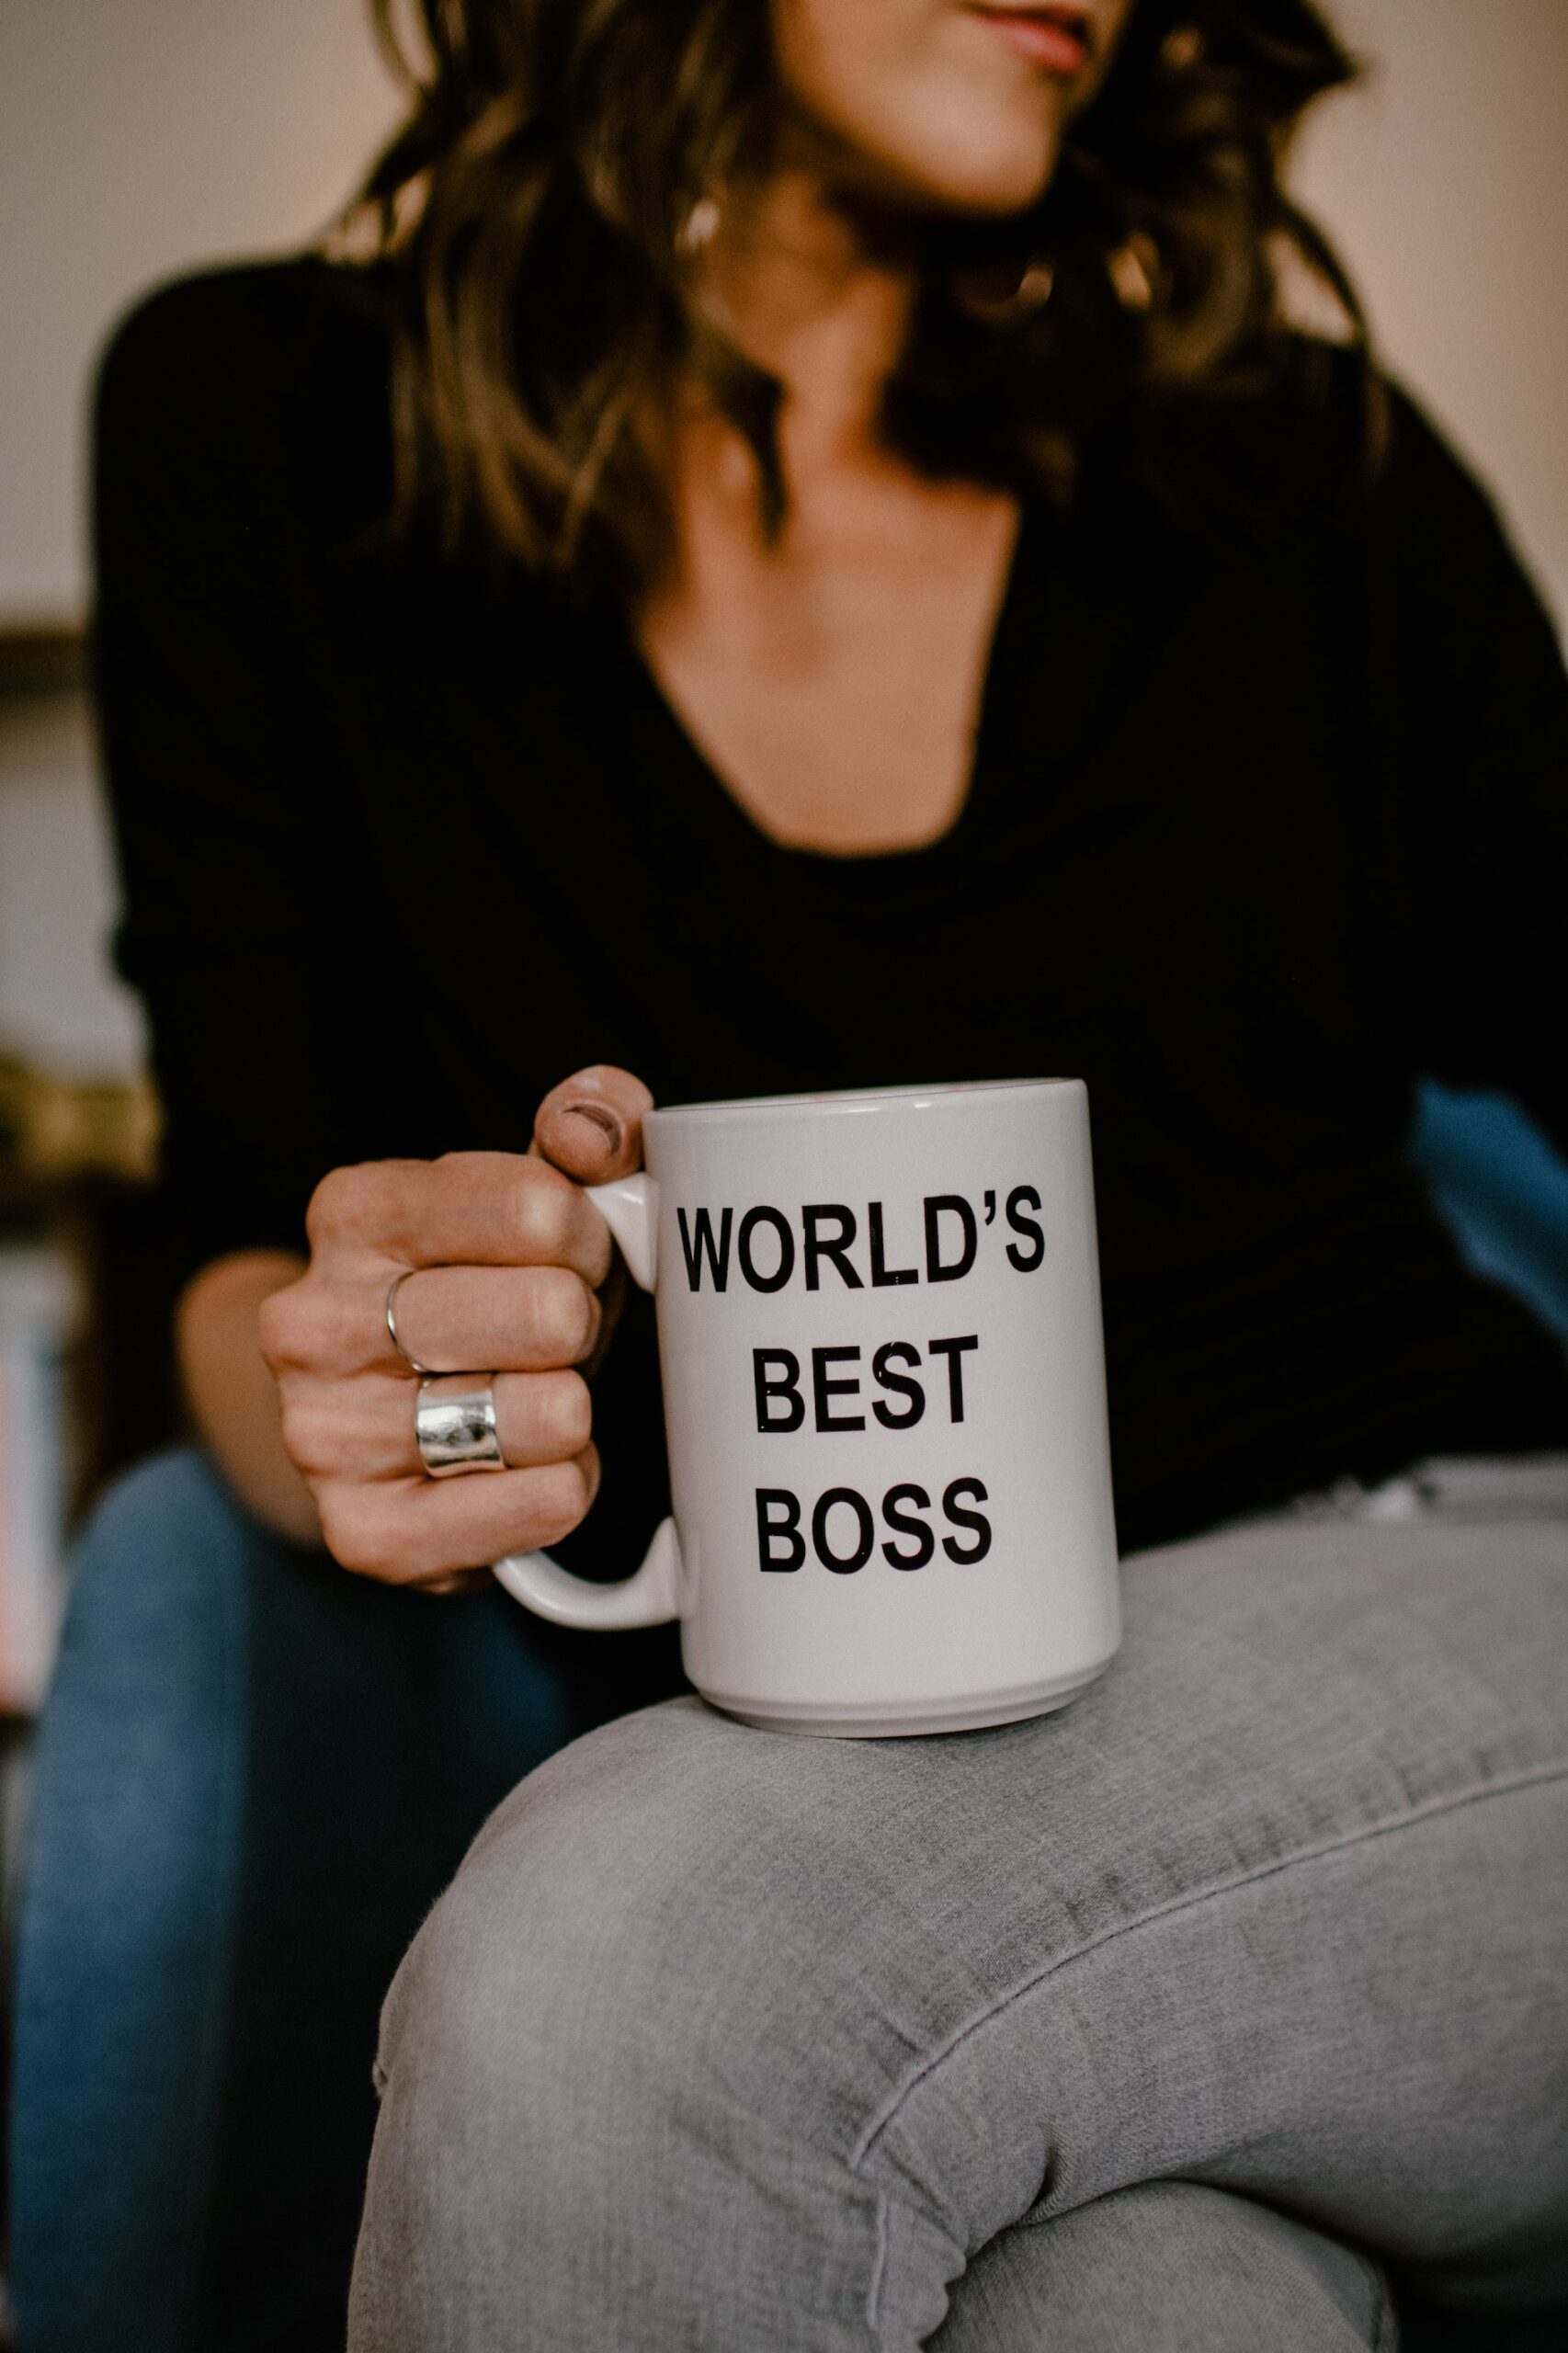 10 Steps to Become Your Own Boss